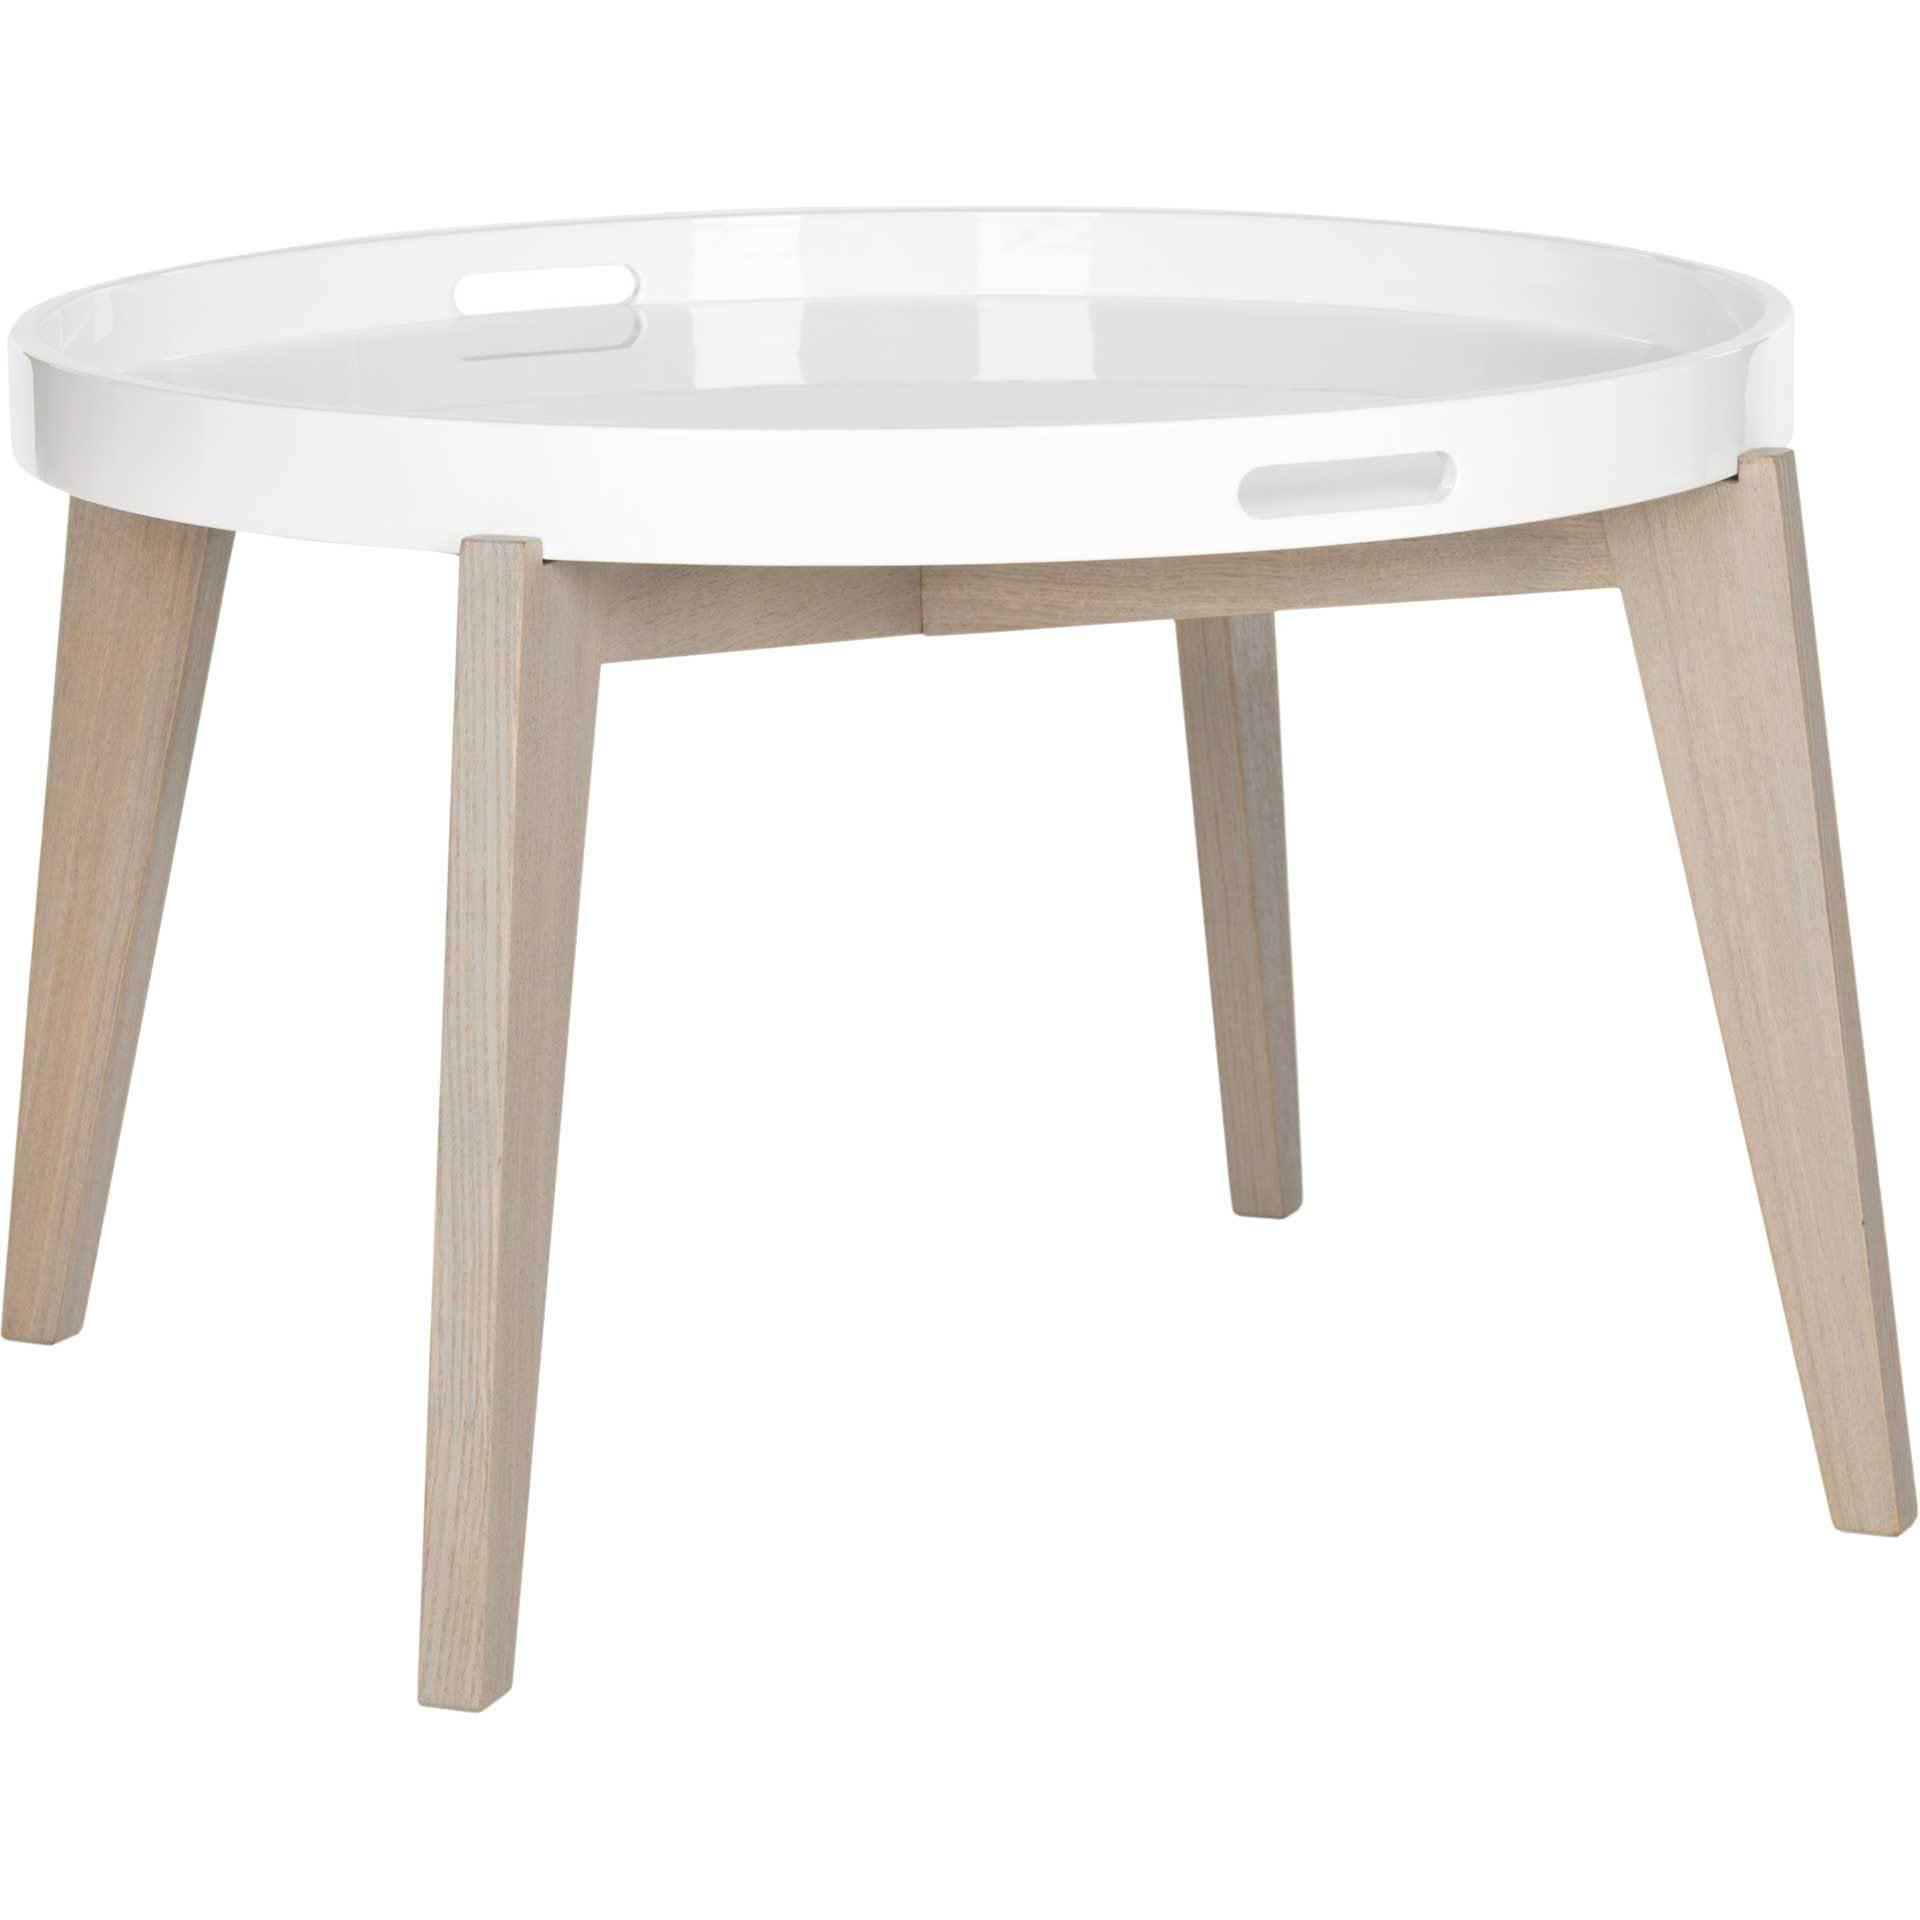 Ece Tray Top Lacquer End Table White/Gray